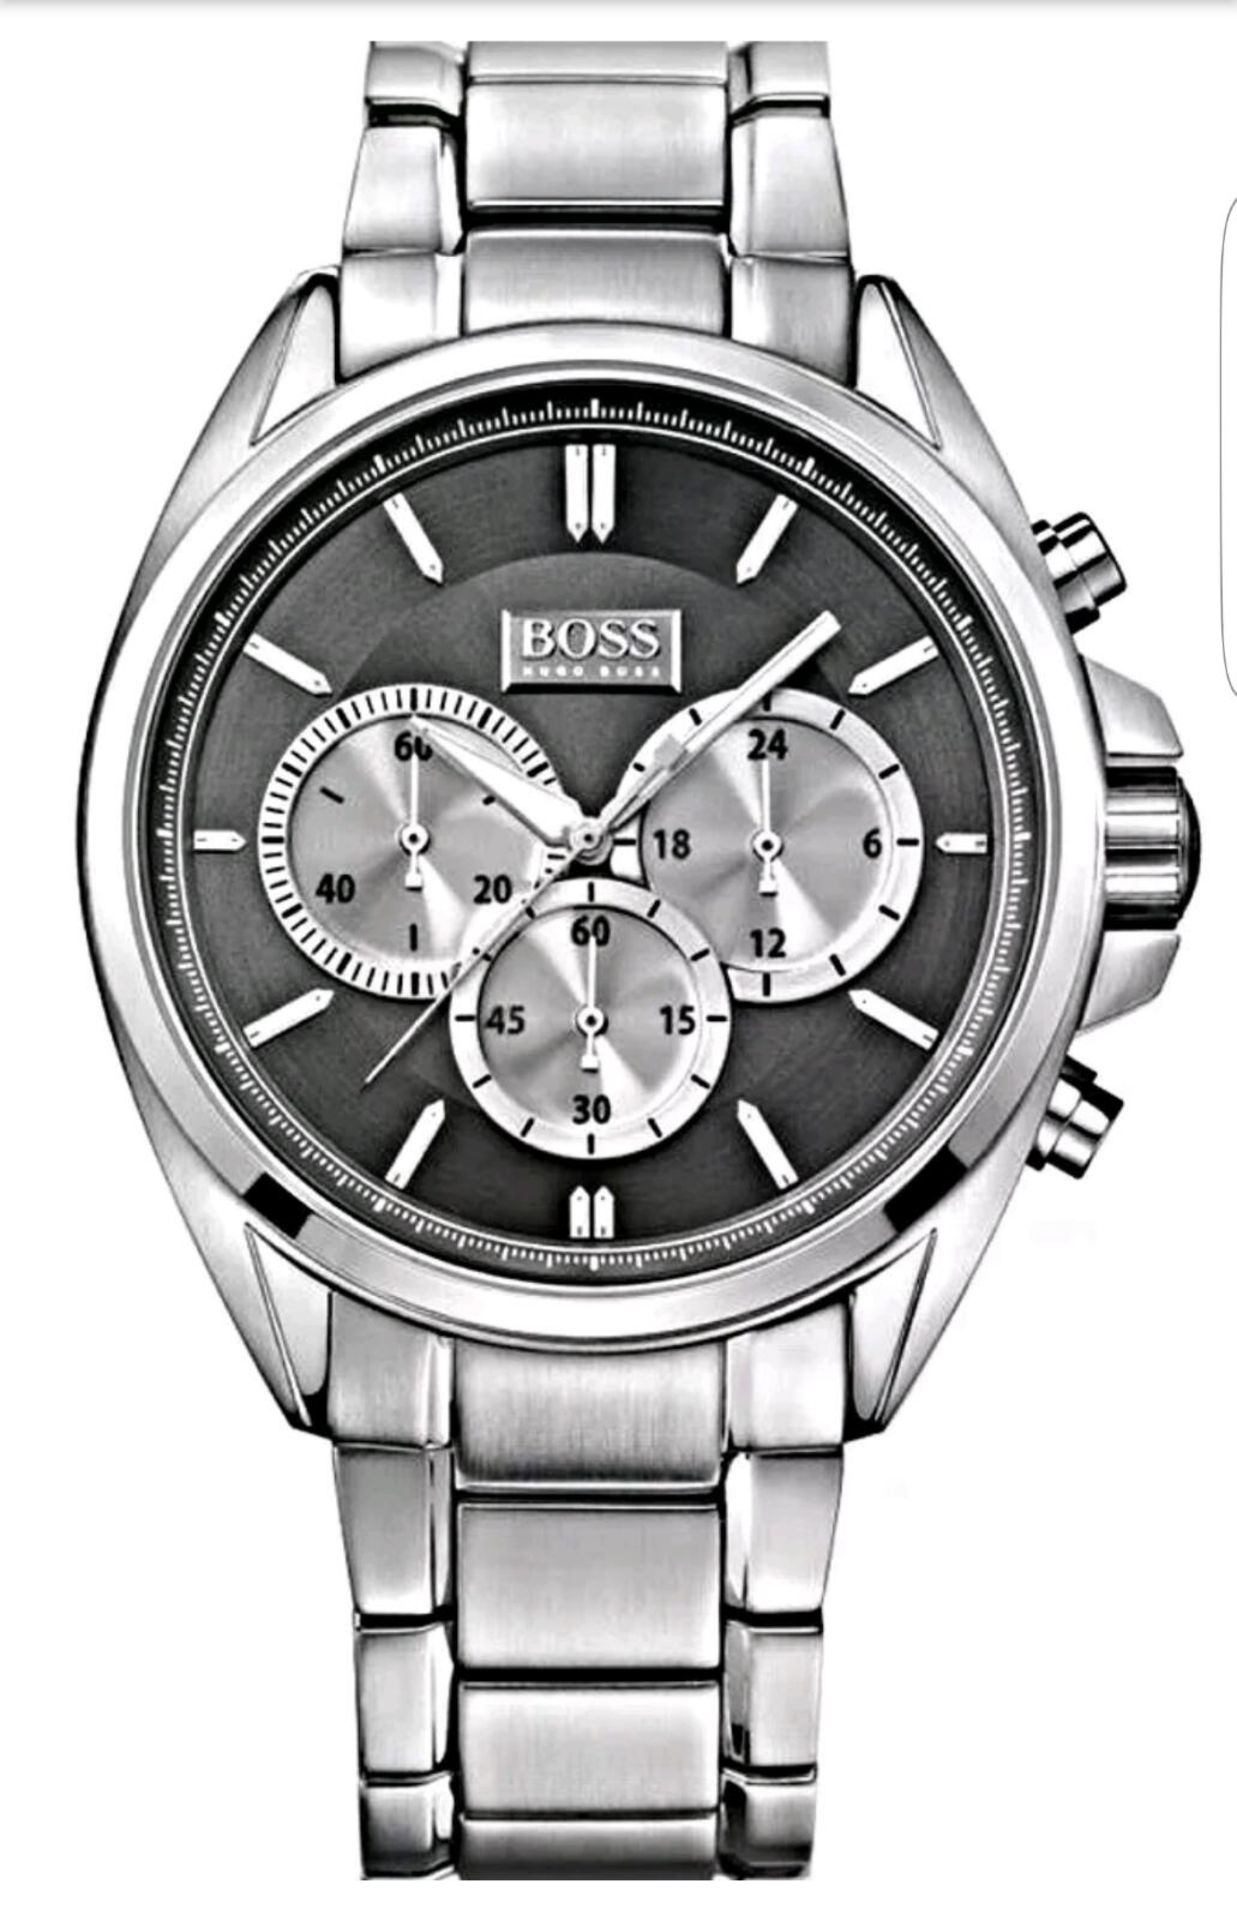 BRAND NEW HUGO BOSS 1512883, COMPLETE WITH ORIGINAL BOX AND MANUAL - RRP £399 - Image 2 of 2